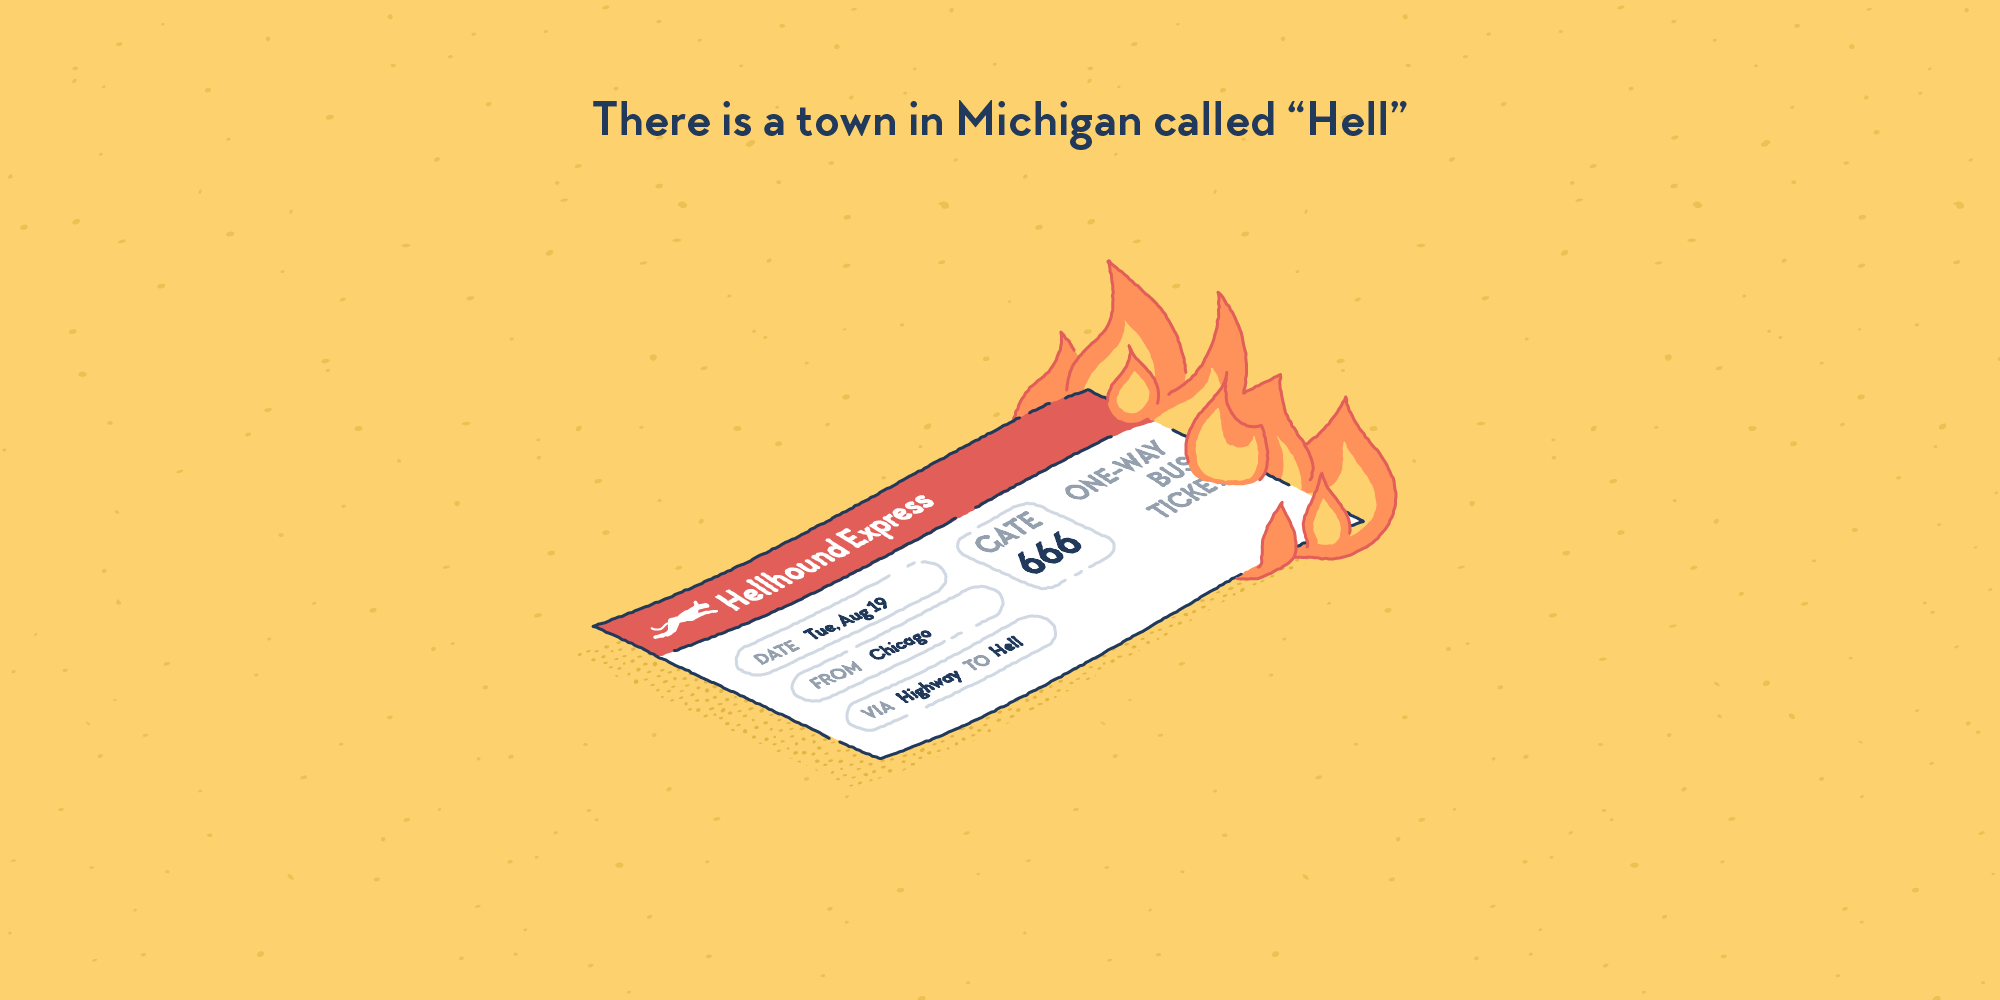 A bus ticket on fire to the town of “Hell”. The ticket mentions a trip via “highway to hell” from the gate number “666”.